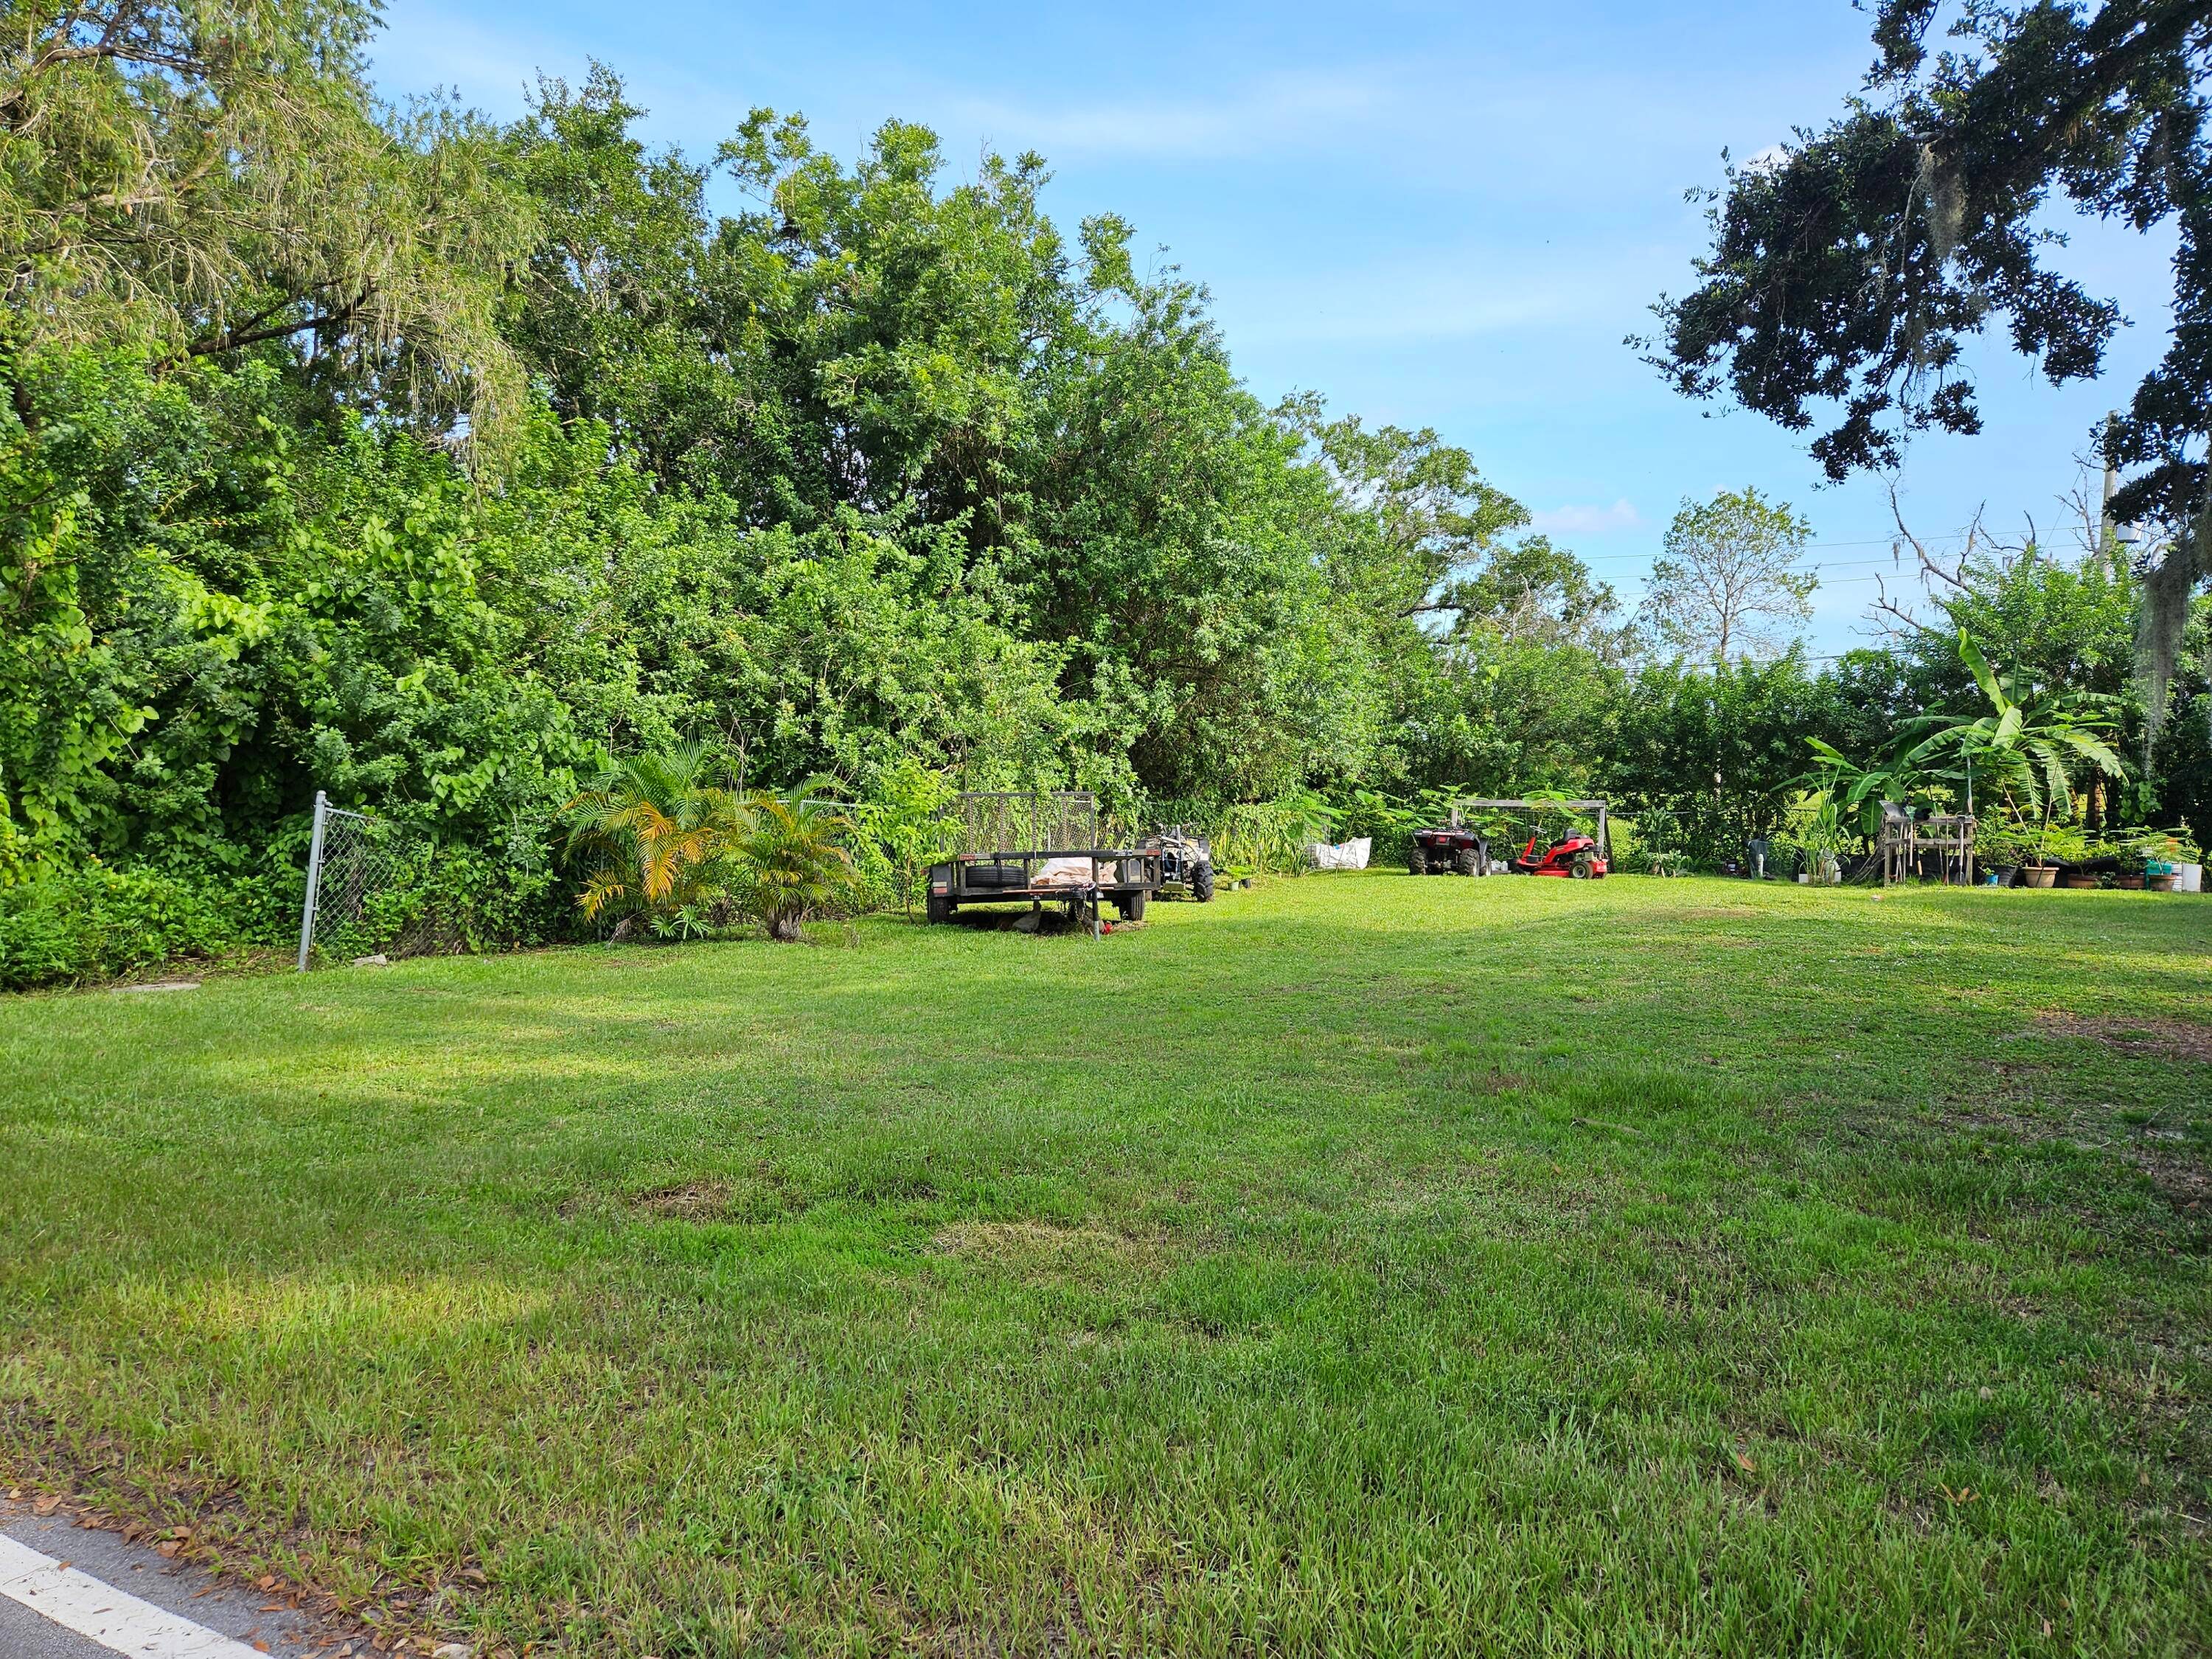 40X90 cleared land, No HOA, Paved Road, Near Freshwater, Brackishwater, and Saltwater for fishing and water activities.